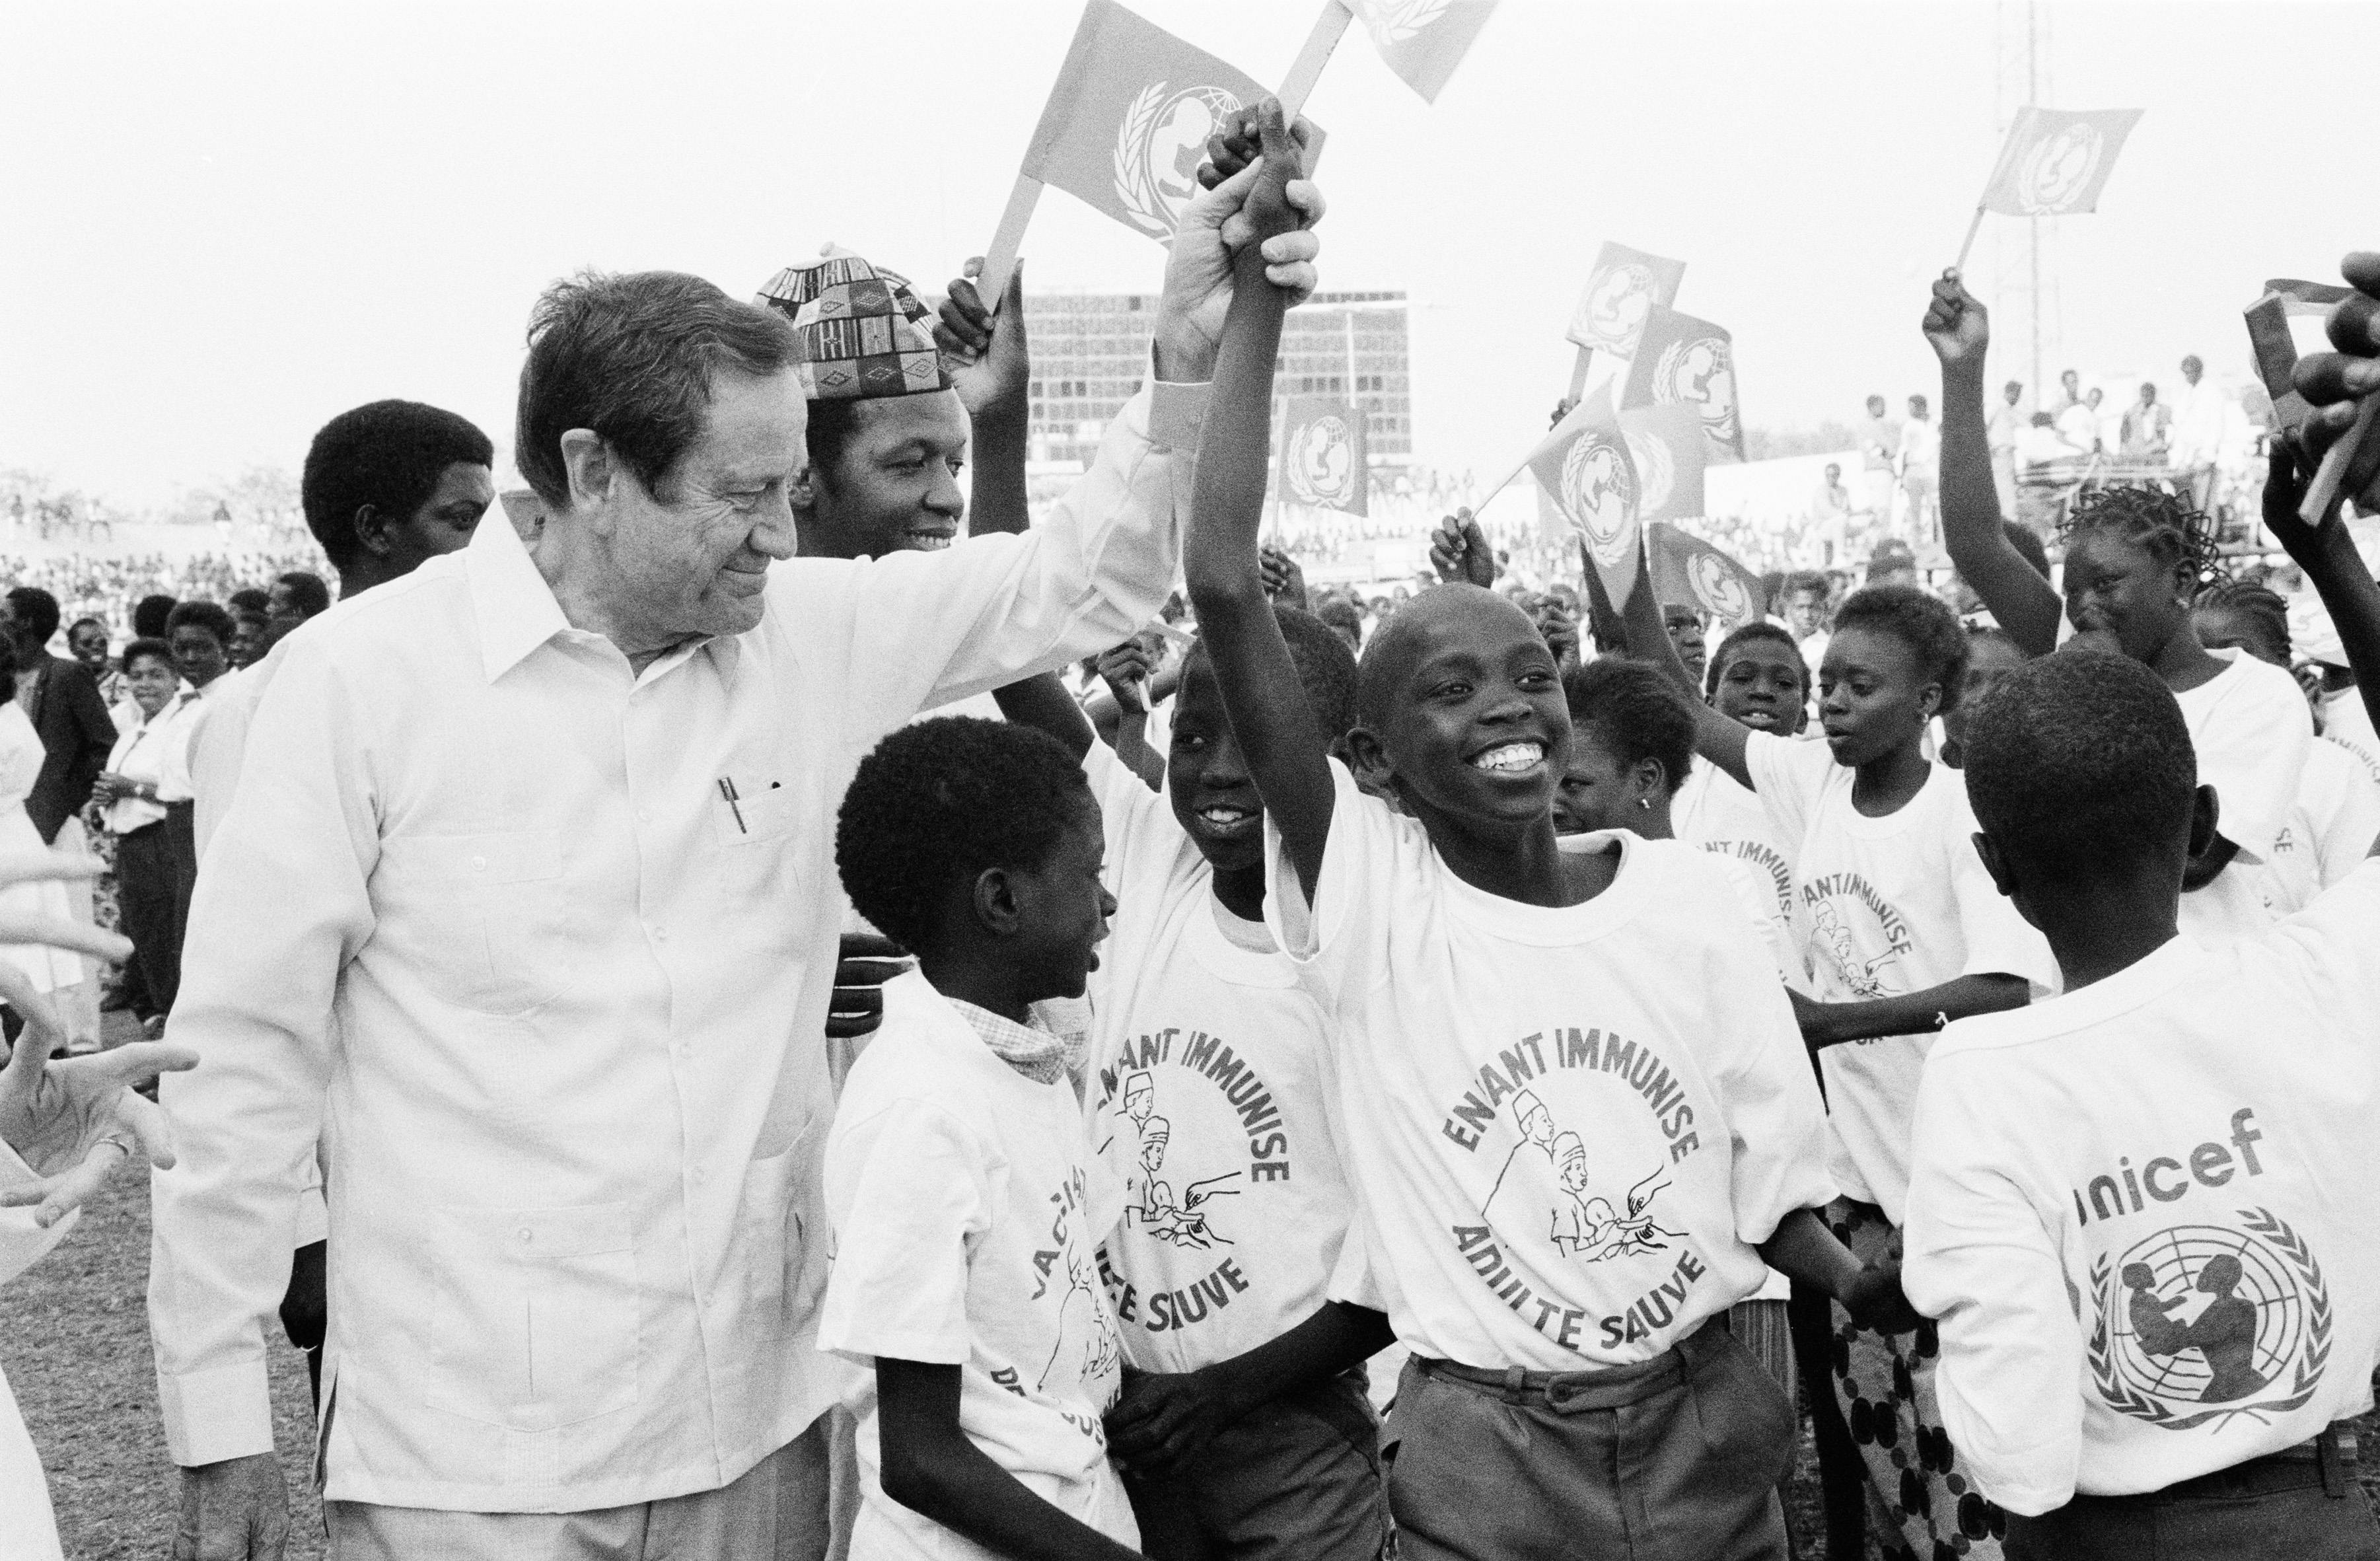 In 1987 in Senegal, UNICEF Executive Director James Grant and UNICEF Goodwill Ambassador Liv Ullman joined more than 50,000 people at Demba Diop National Stadium in Dakar, the capital, in support of child survival and development. 